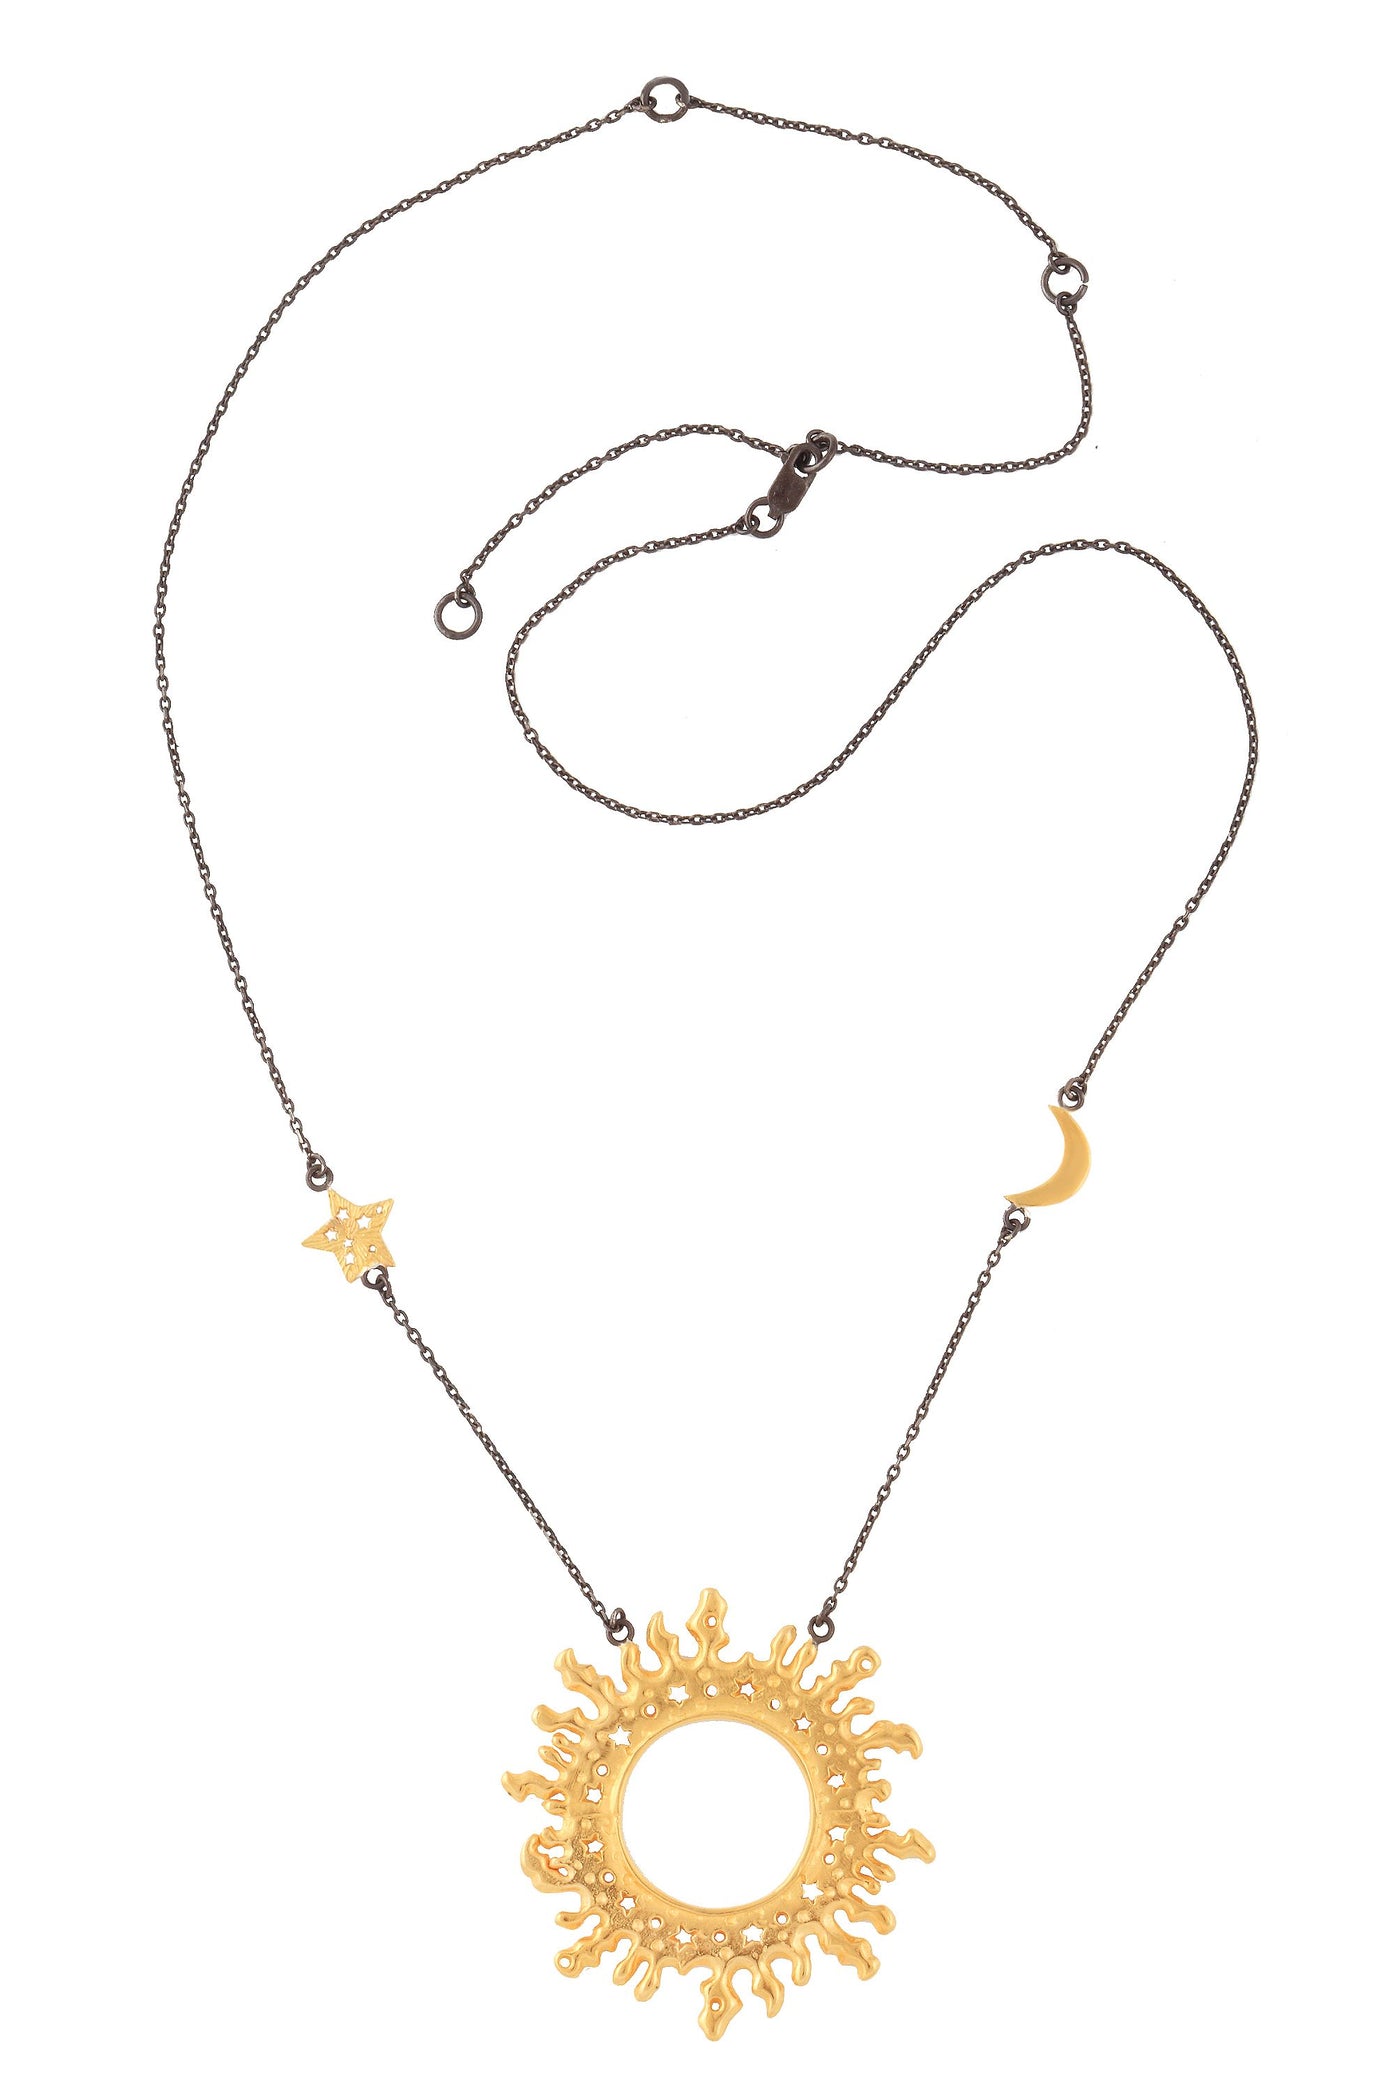 Sun with star and moon on the chain necklace. Silver, gold-plated, oxidized